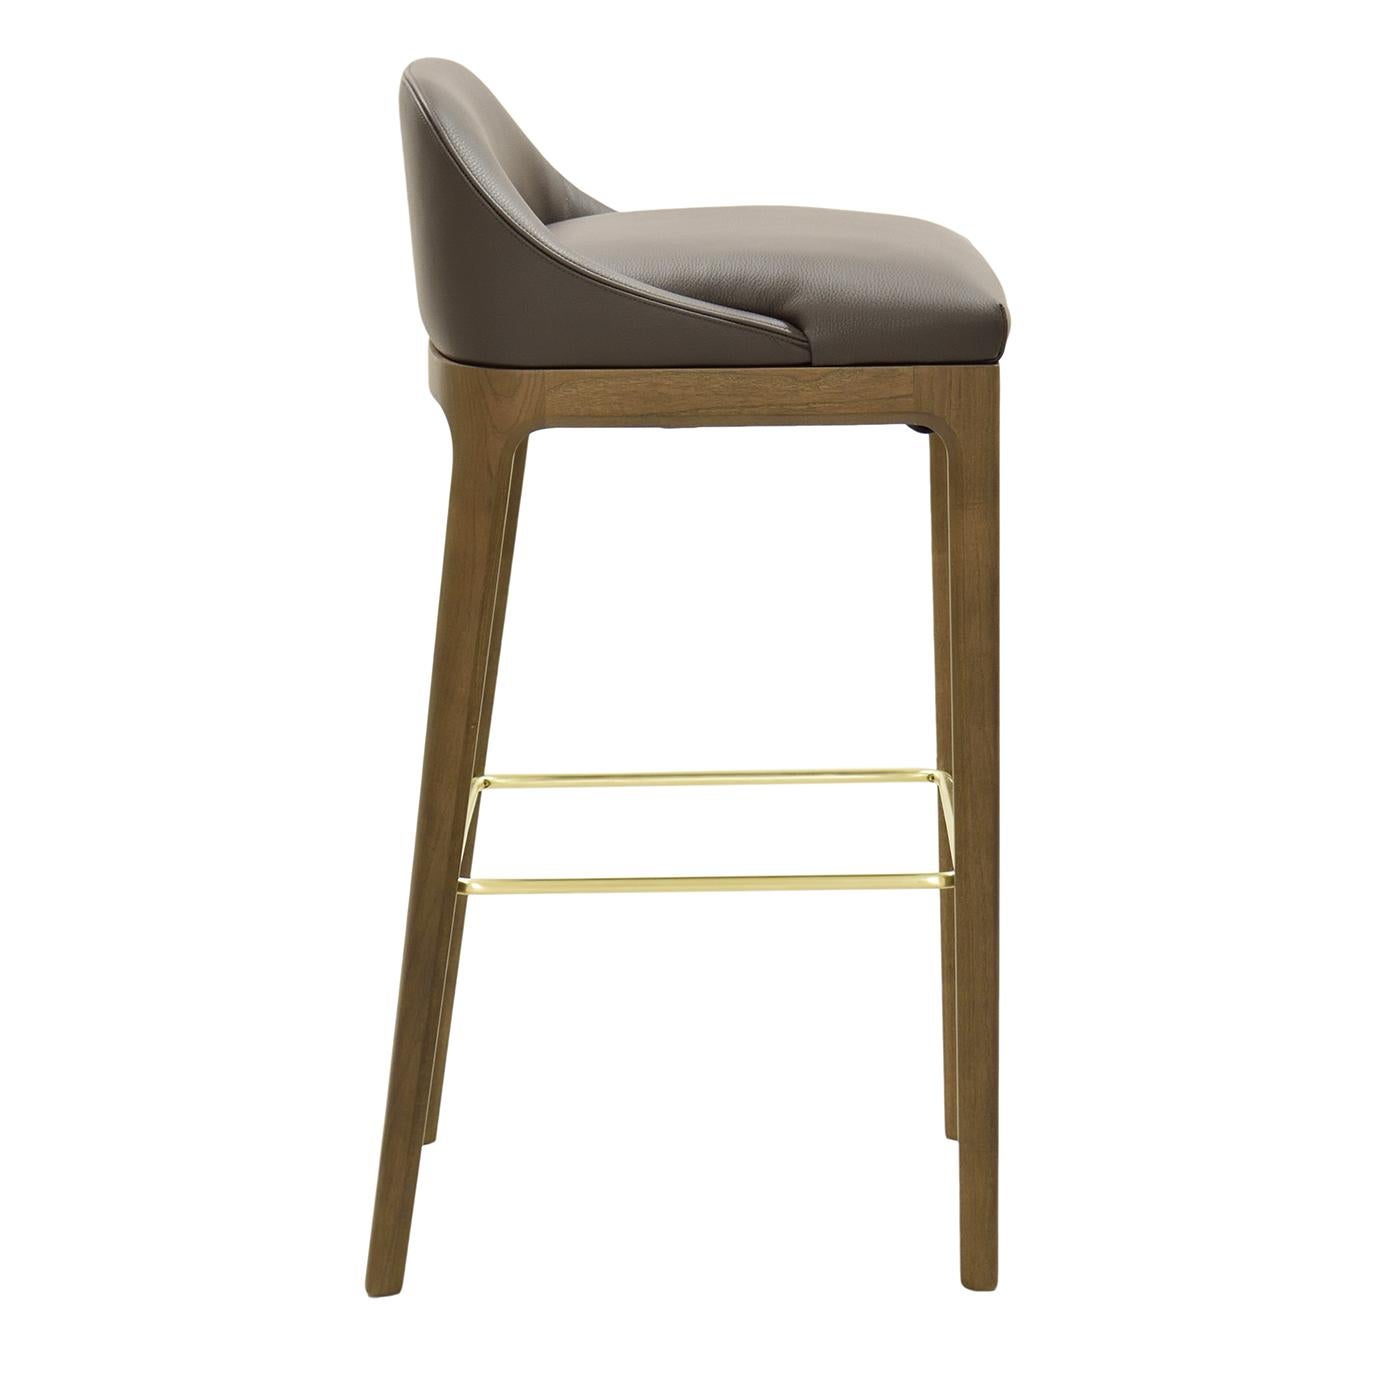 This polished bar stool in ash combines a modern aesthetic with high comfort, provided by its plush padded seat. Showcasing a harmonious silhouette, this exclusive stool stands on four straight legs connected by a metal footrest with a gold glossy